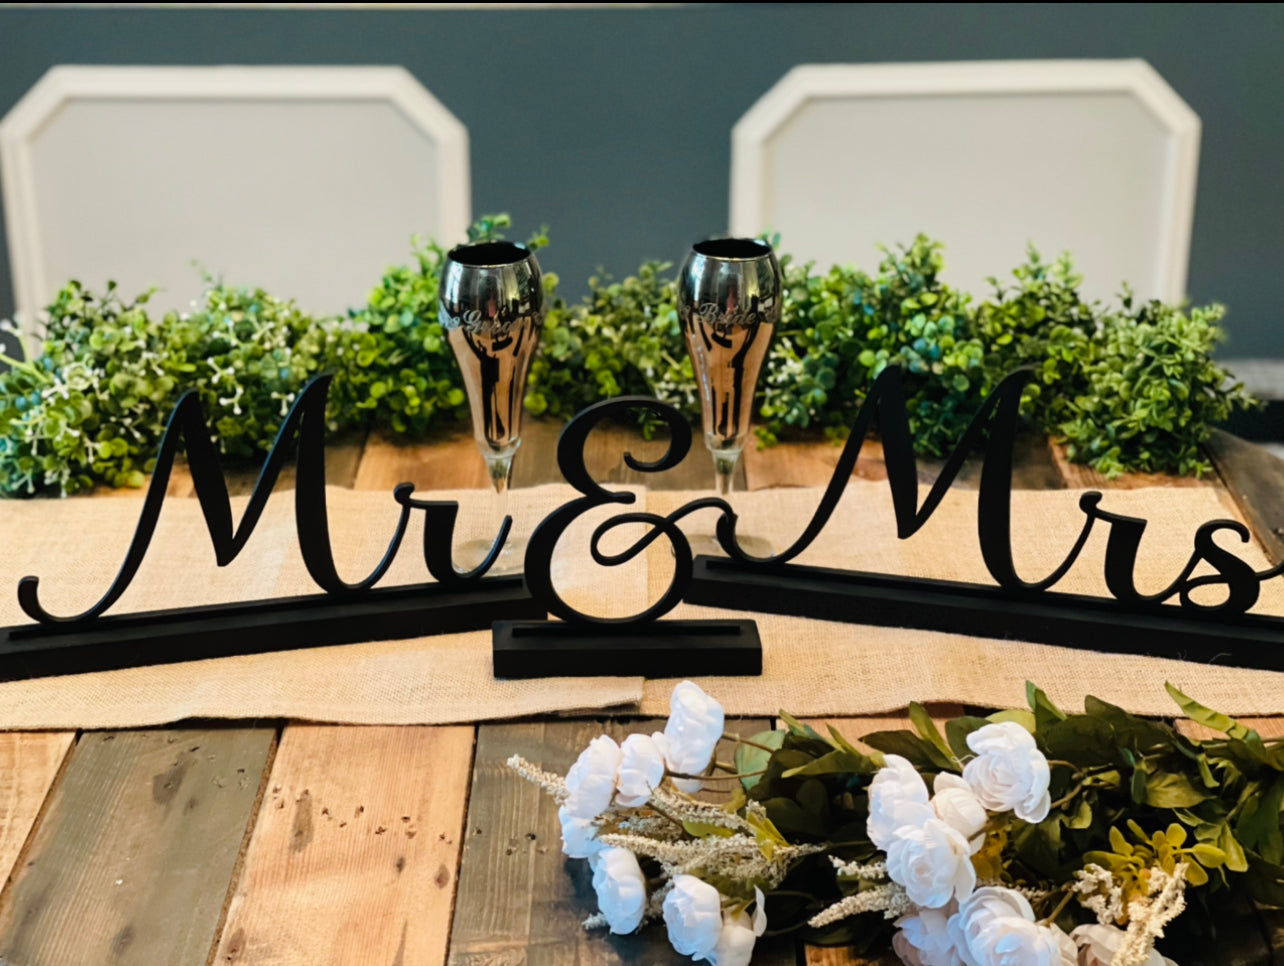 This image shows the black Mr. & Mrs. table topper with greenery and bride and groom toasting glasses.  (All other embellishments not sold with signs).